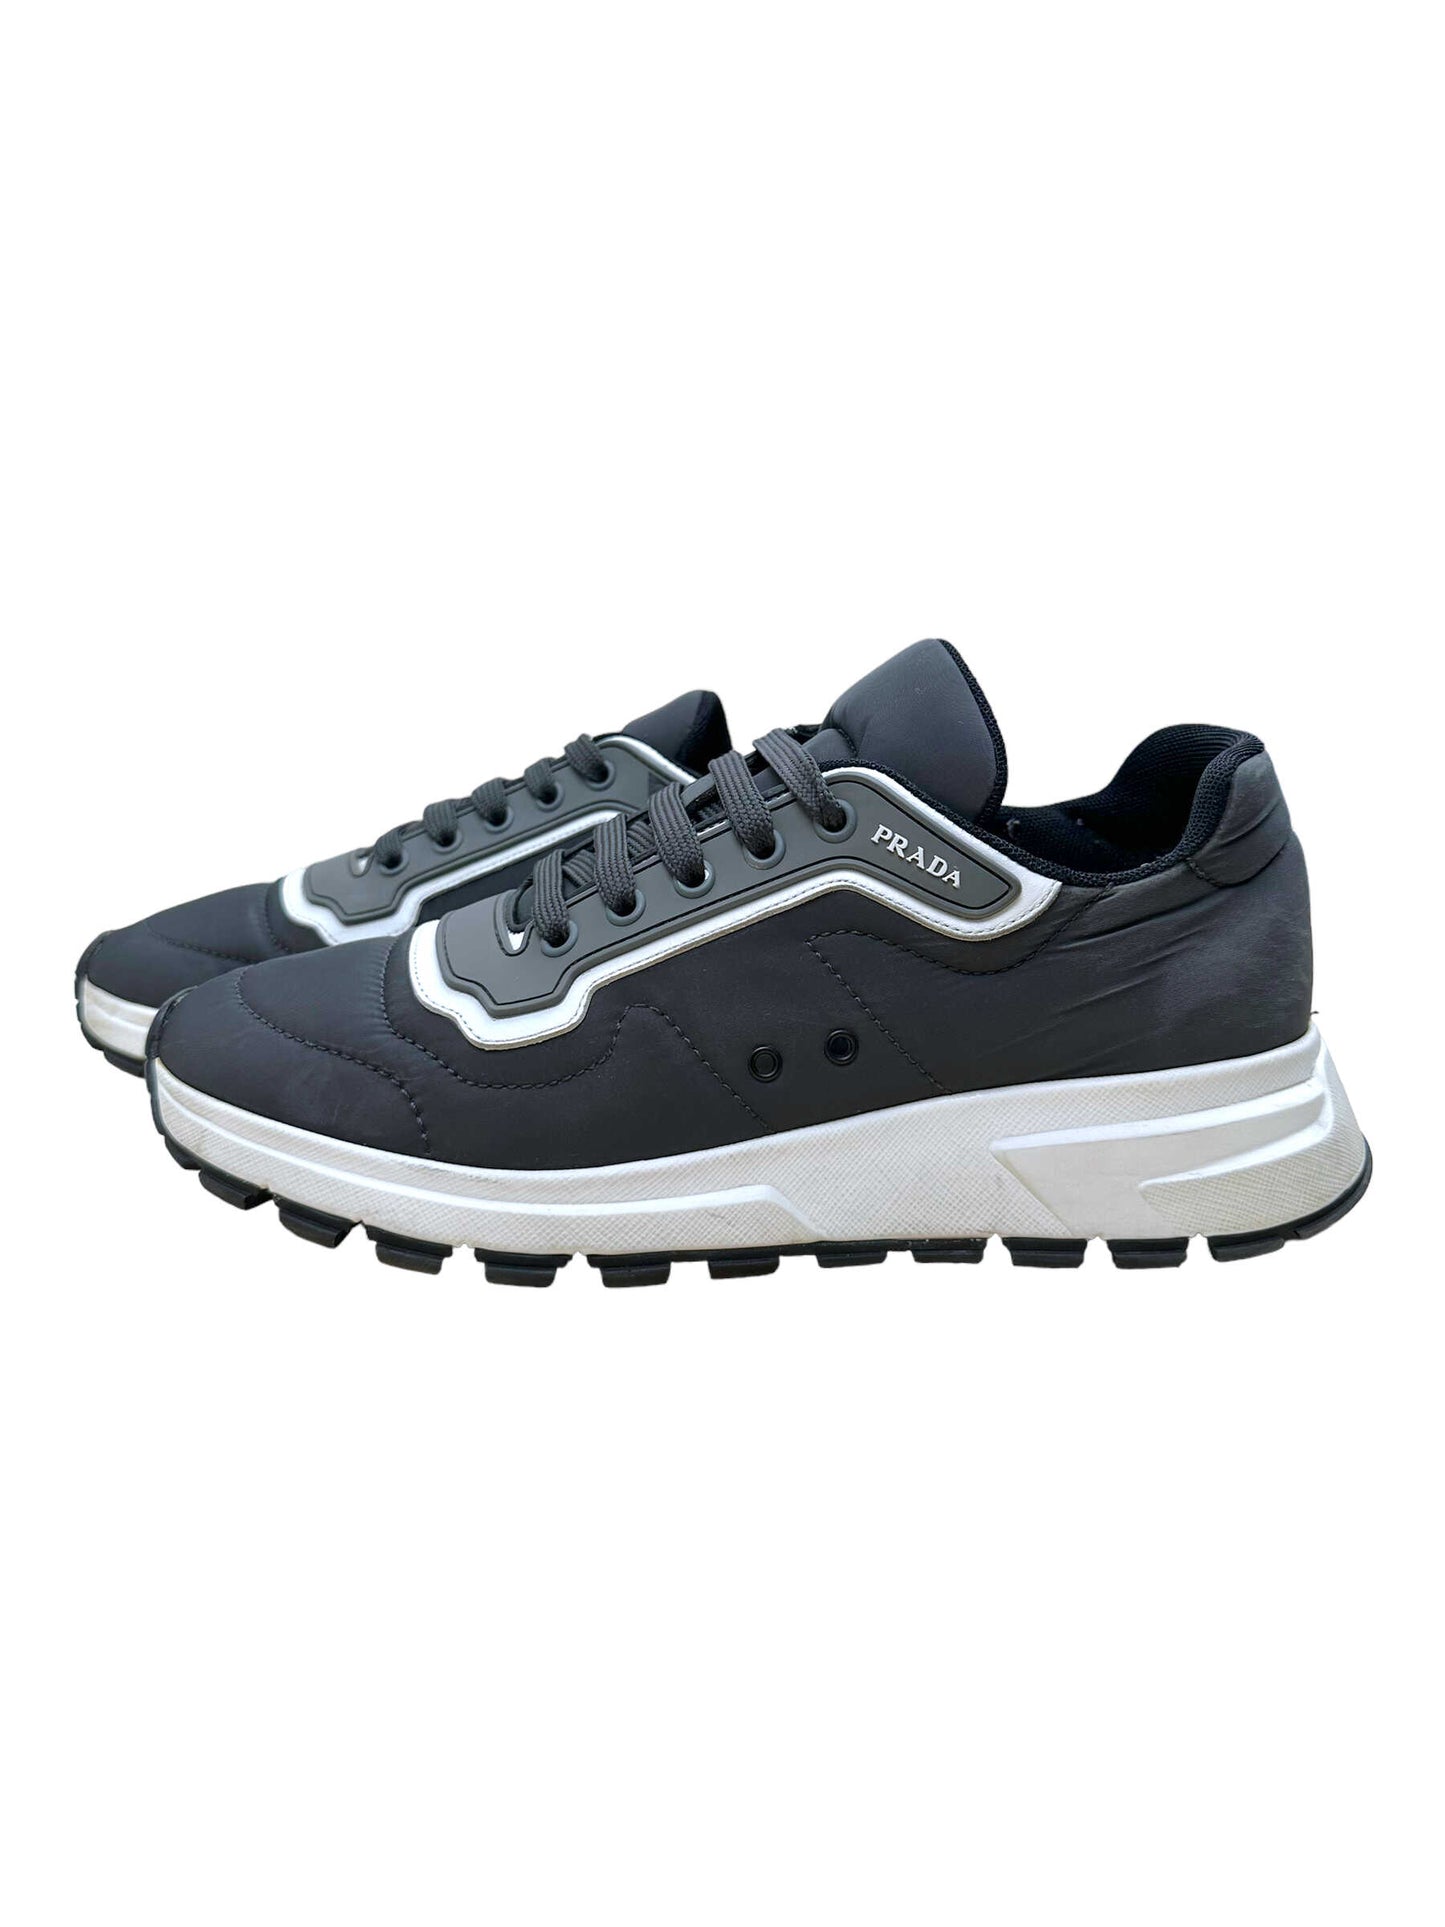 Prada Grey Re-Nylon Casual Sneakers - Genuine Design Luxury Consignment for Men. New & Pre-Owned Clothing, Shoes, & Accessories. Calgary, Canada